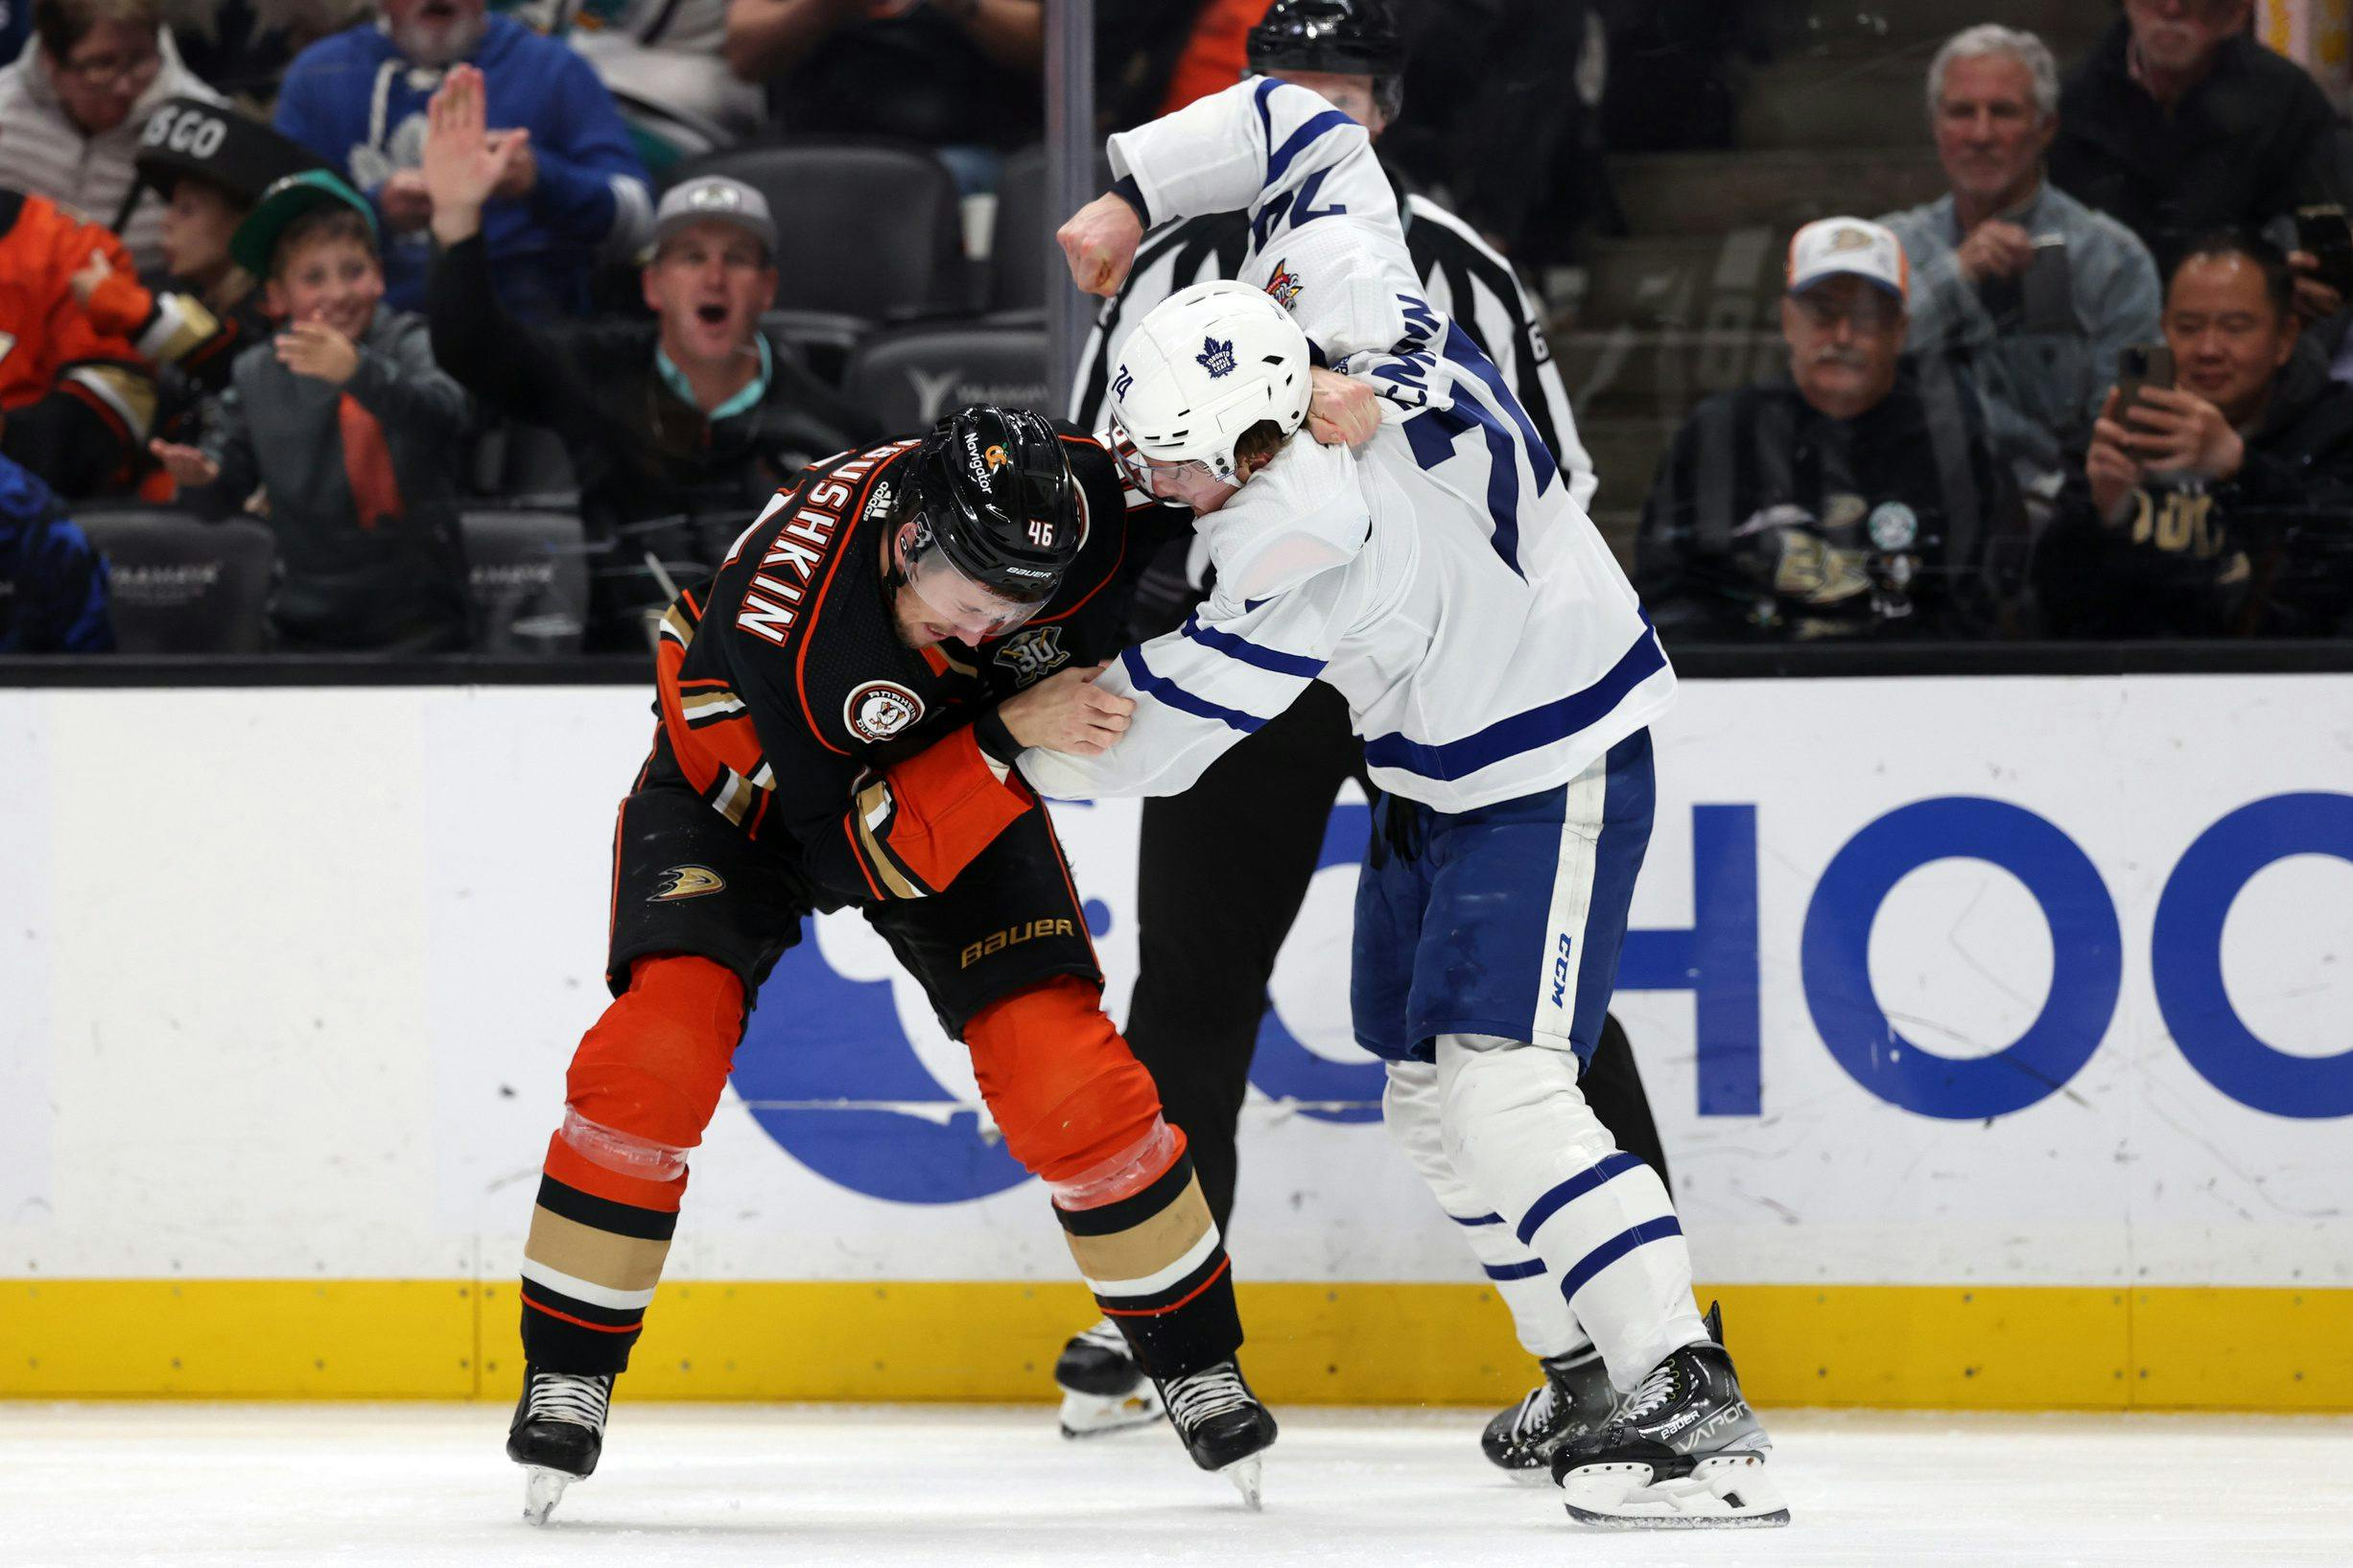 Toronto Maple Leafs’ Bobby McMann ejected from game vs. Ducks for boarding